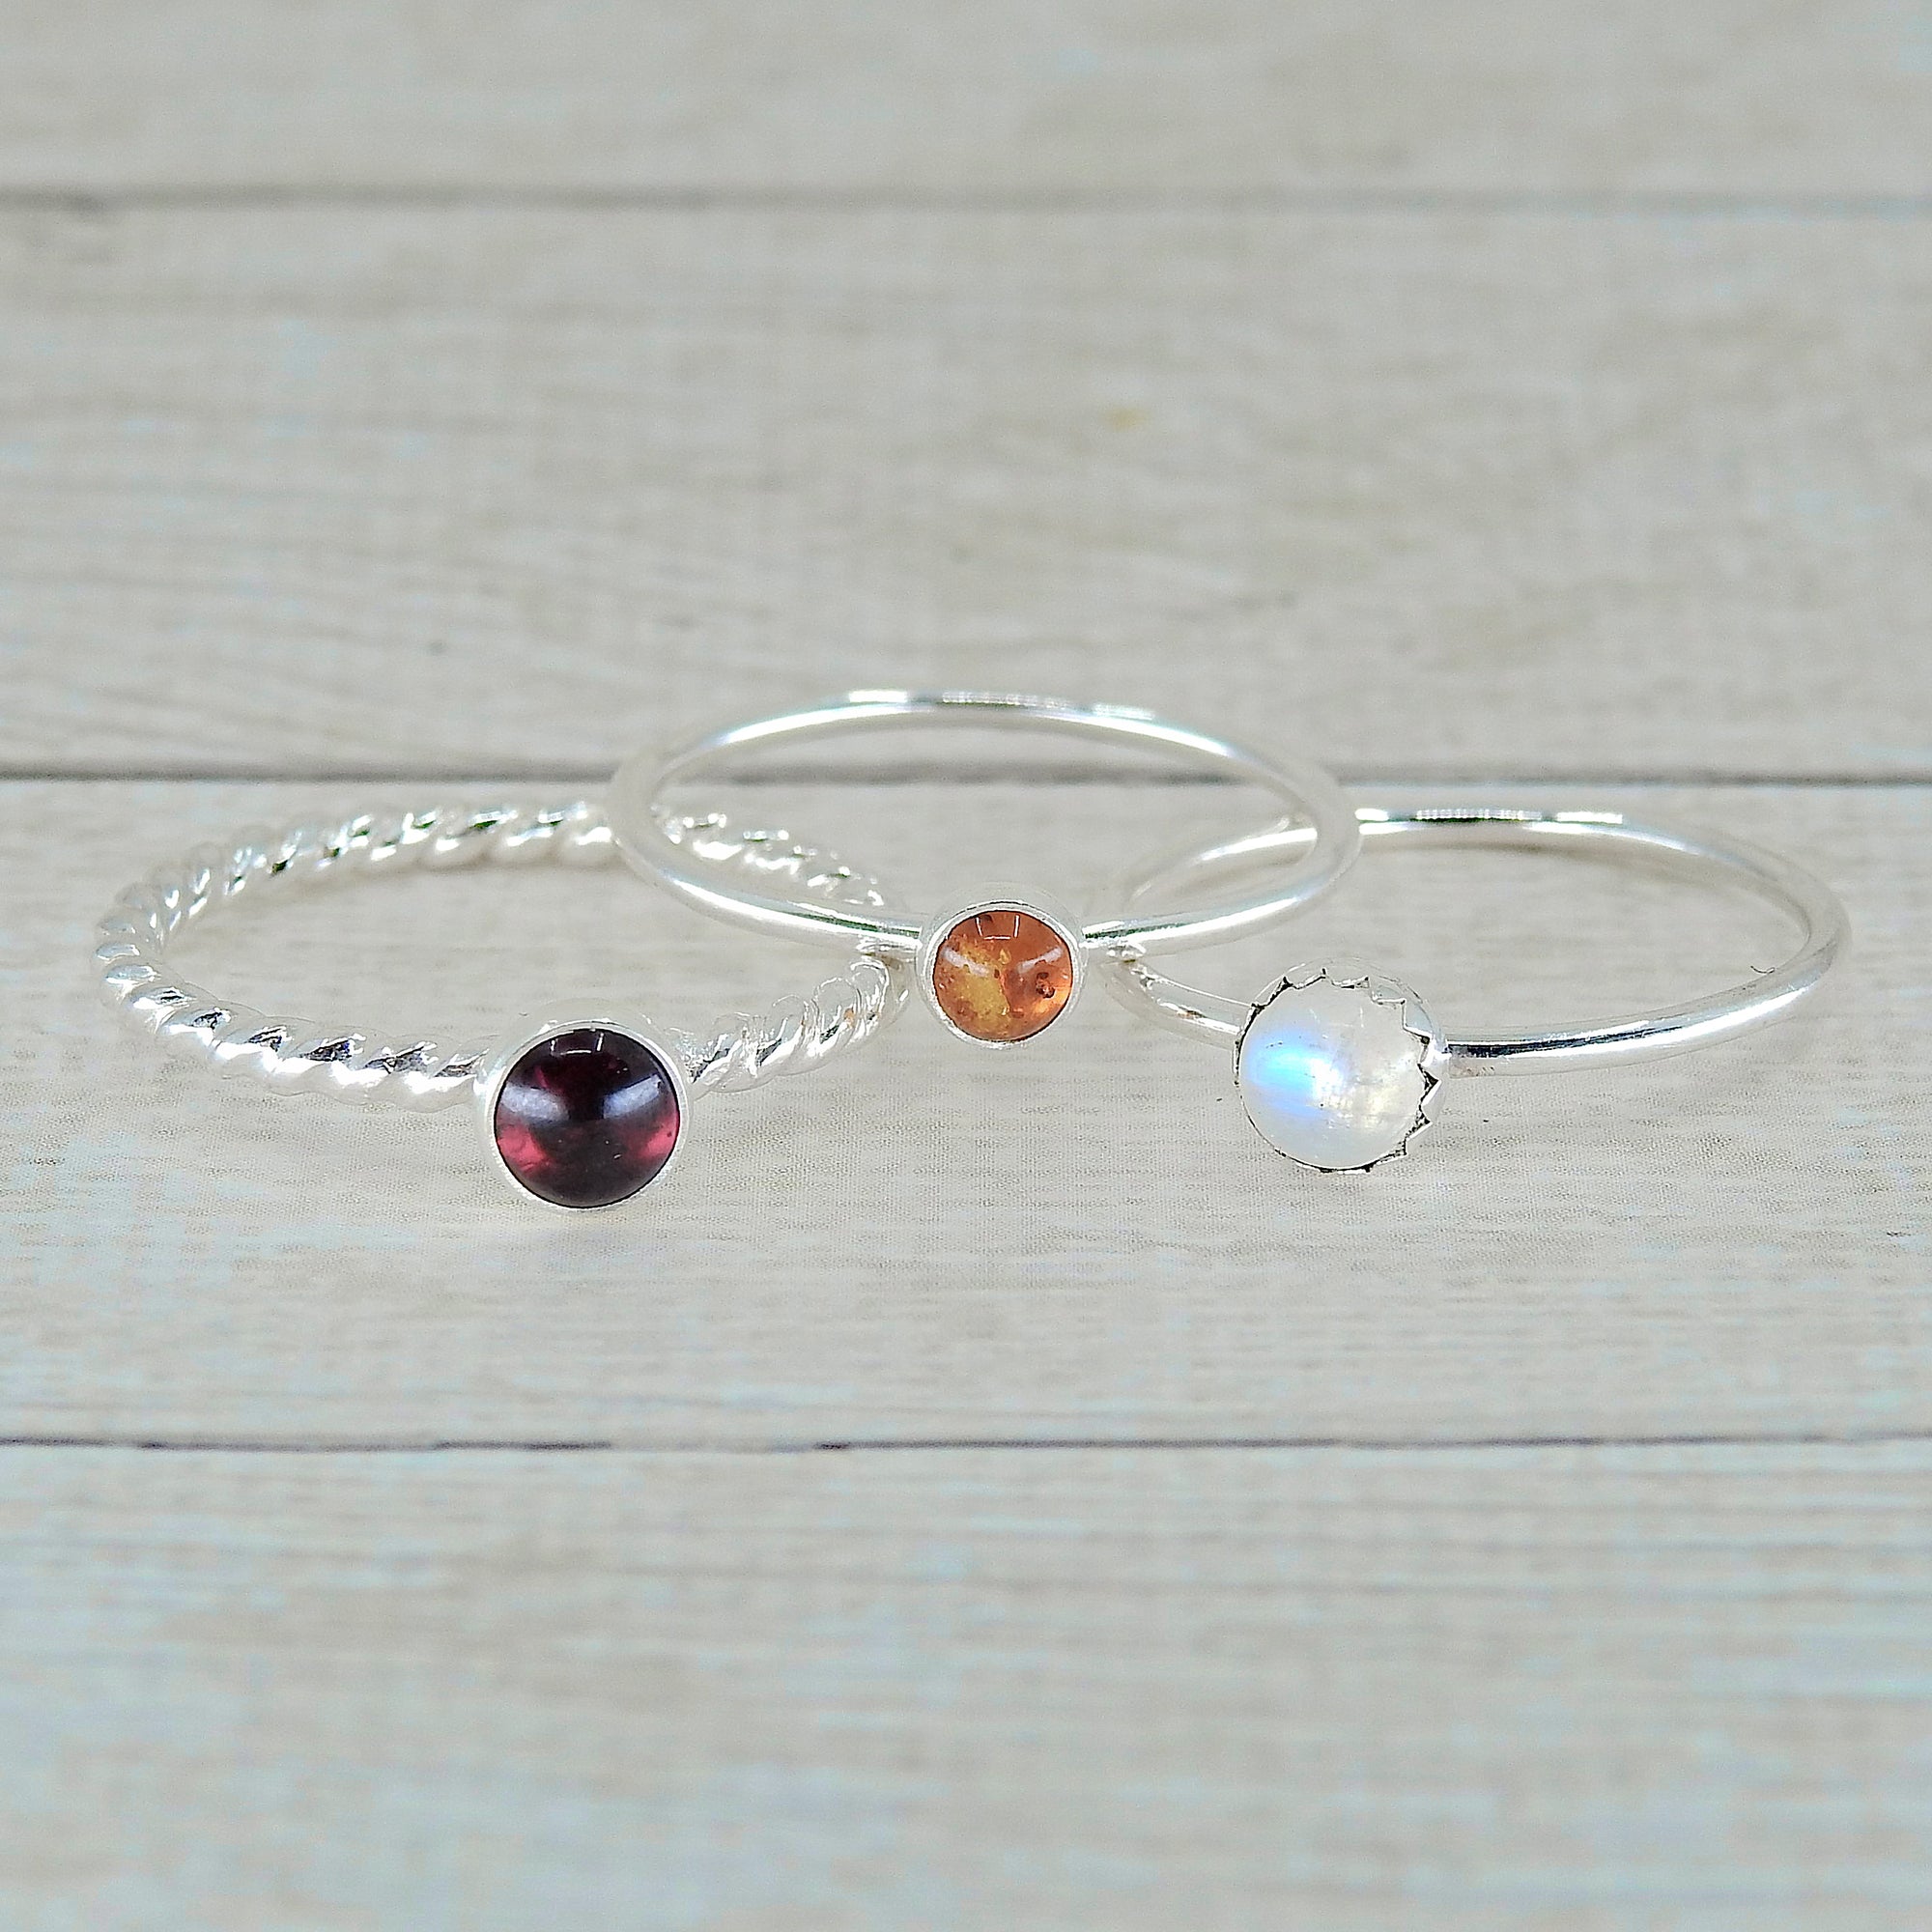 The Isis Ring Stack of Fertility - Baltic Amber, Rhodolite Garnet & Moonstone - Made to Order